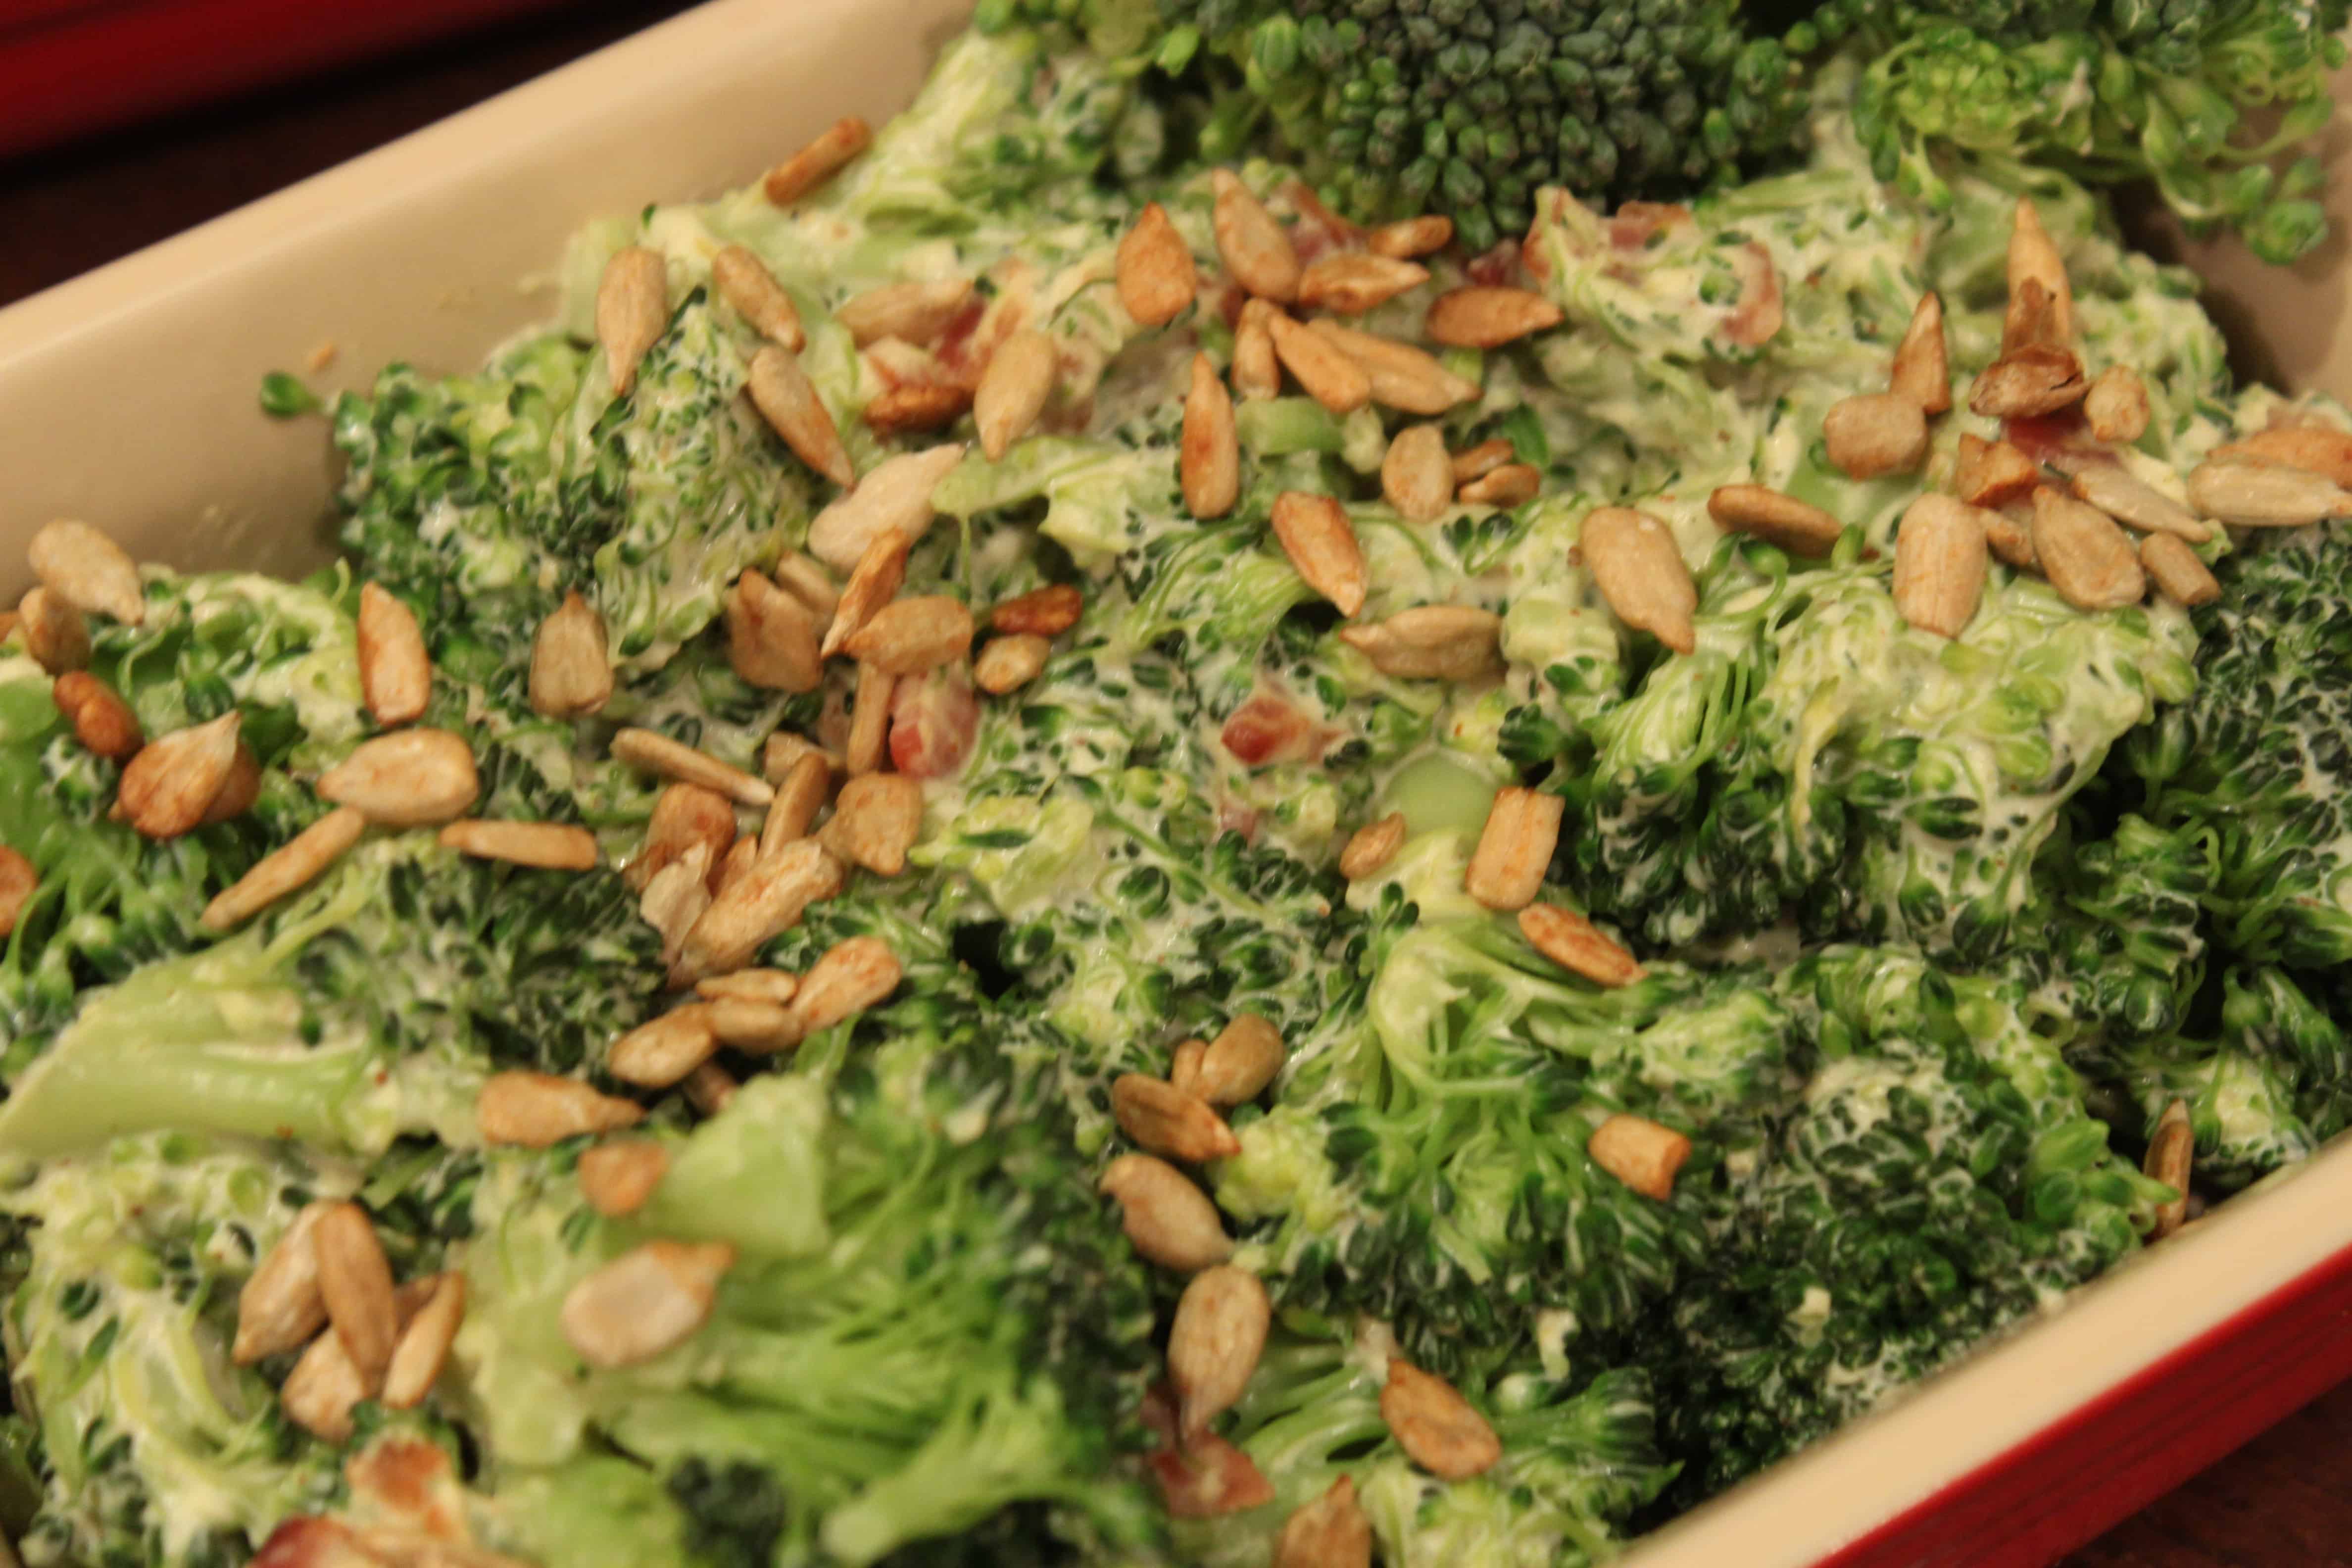 Cheese and broccoli casserole with sunflower seeds